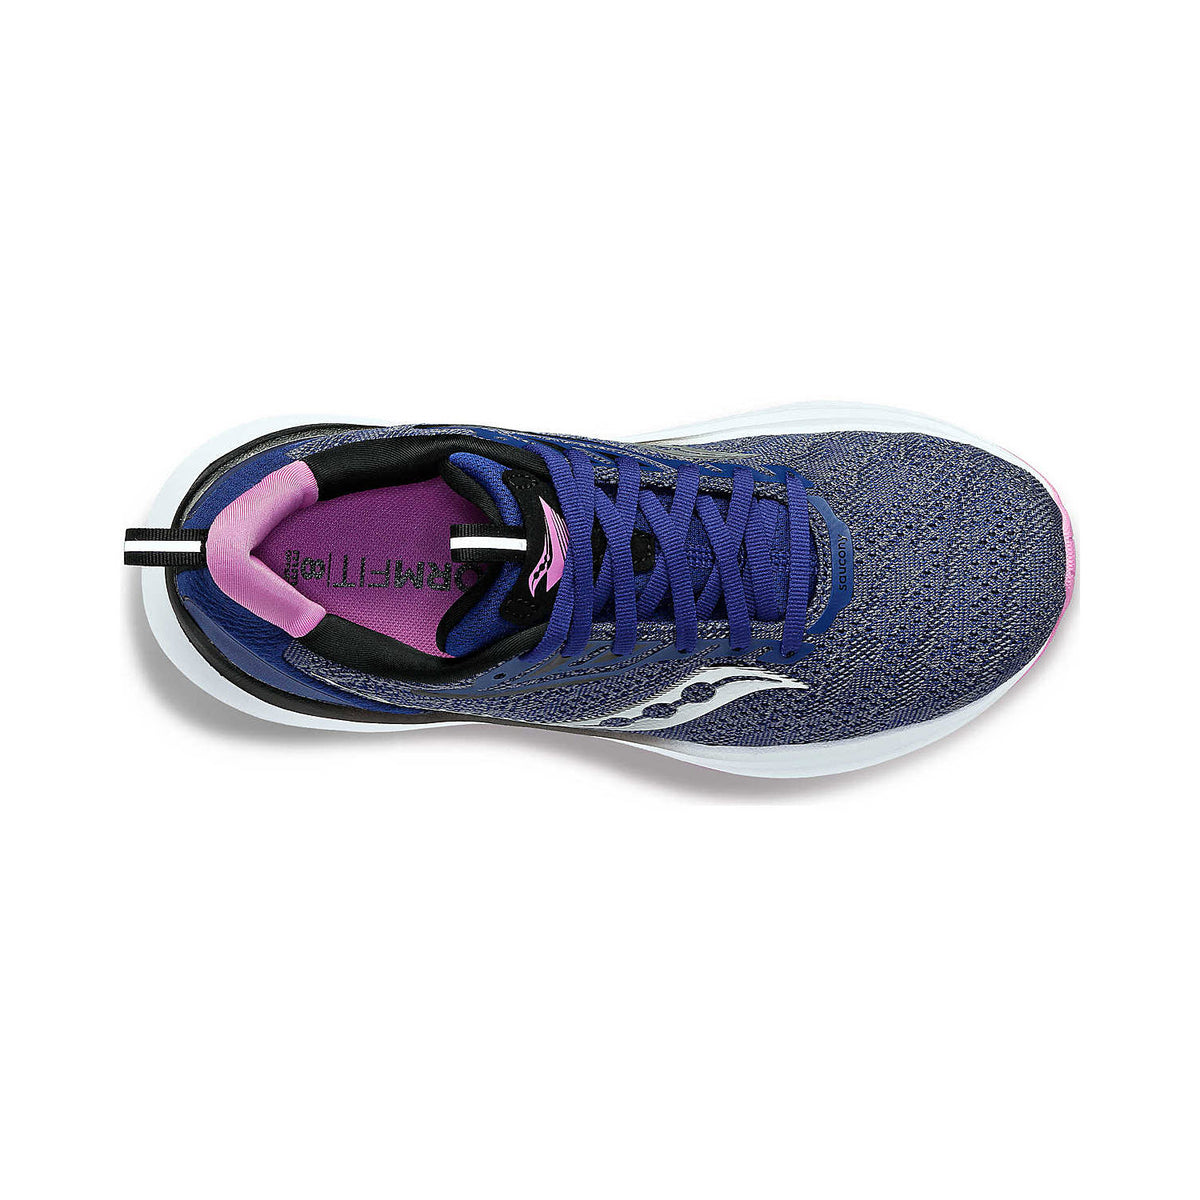 Top view of a Saucony Echelon 9 Indigo/Grape - Womens comfort shoe with pink accents and a black pull tab on the heel.